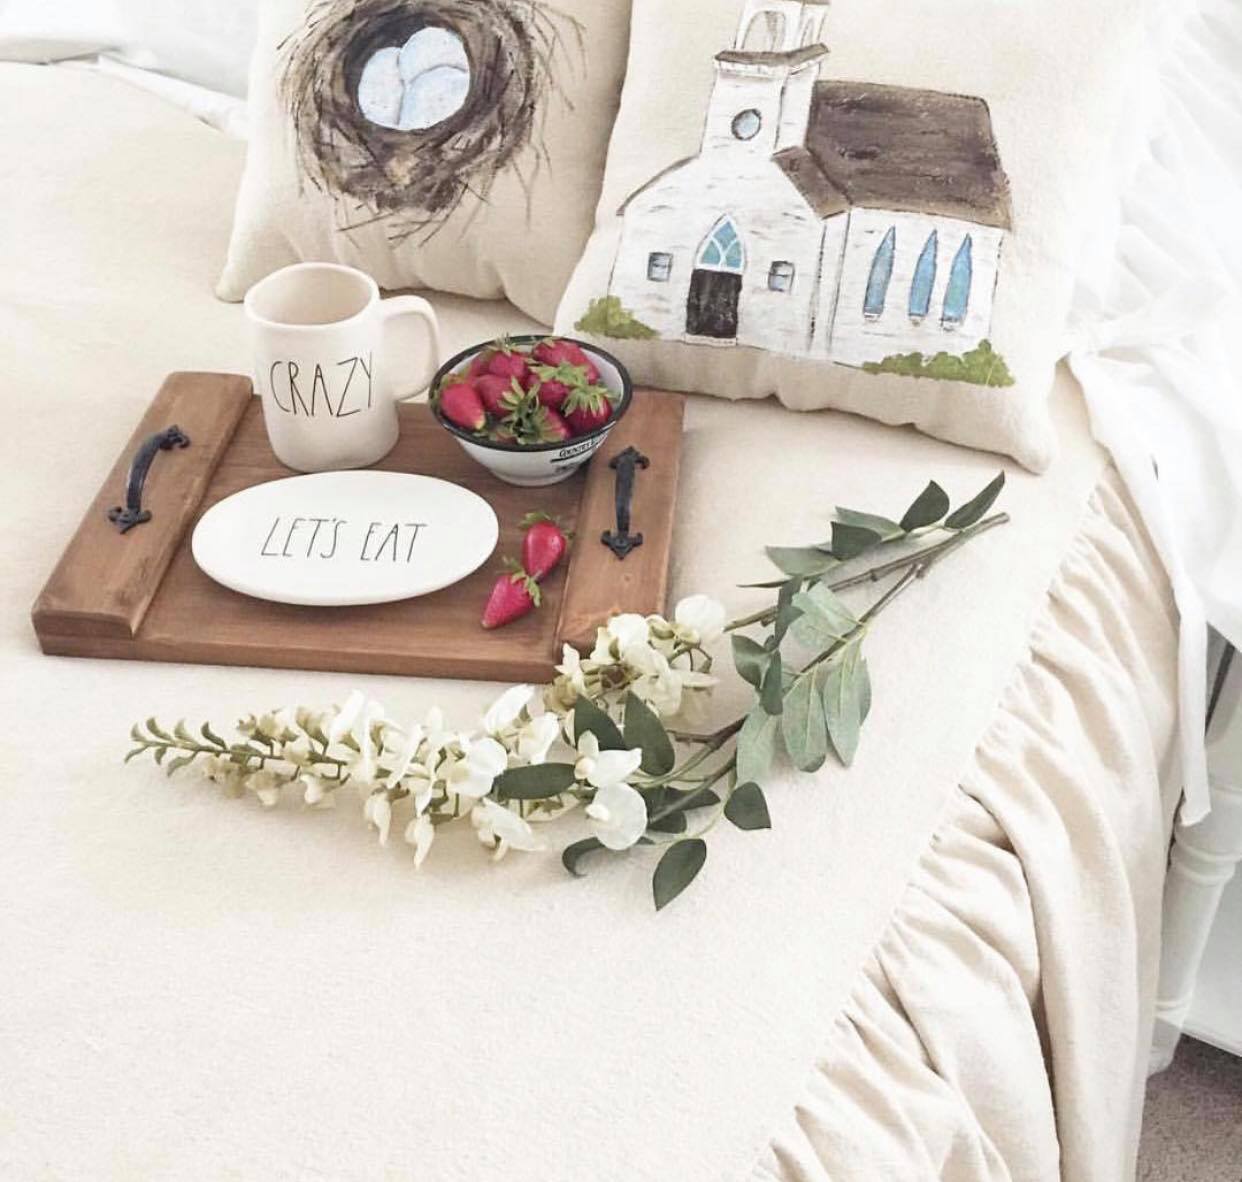 Farmhouse bedding with ruffle. Painted bird and nest pillows tray with plate and strawberry's